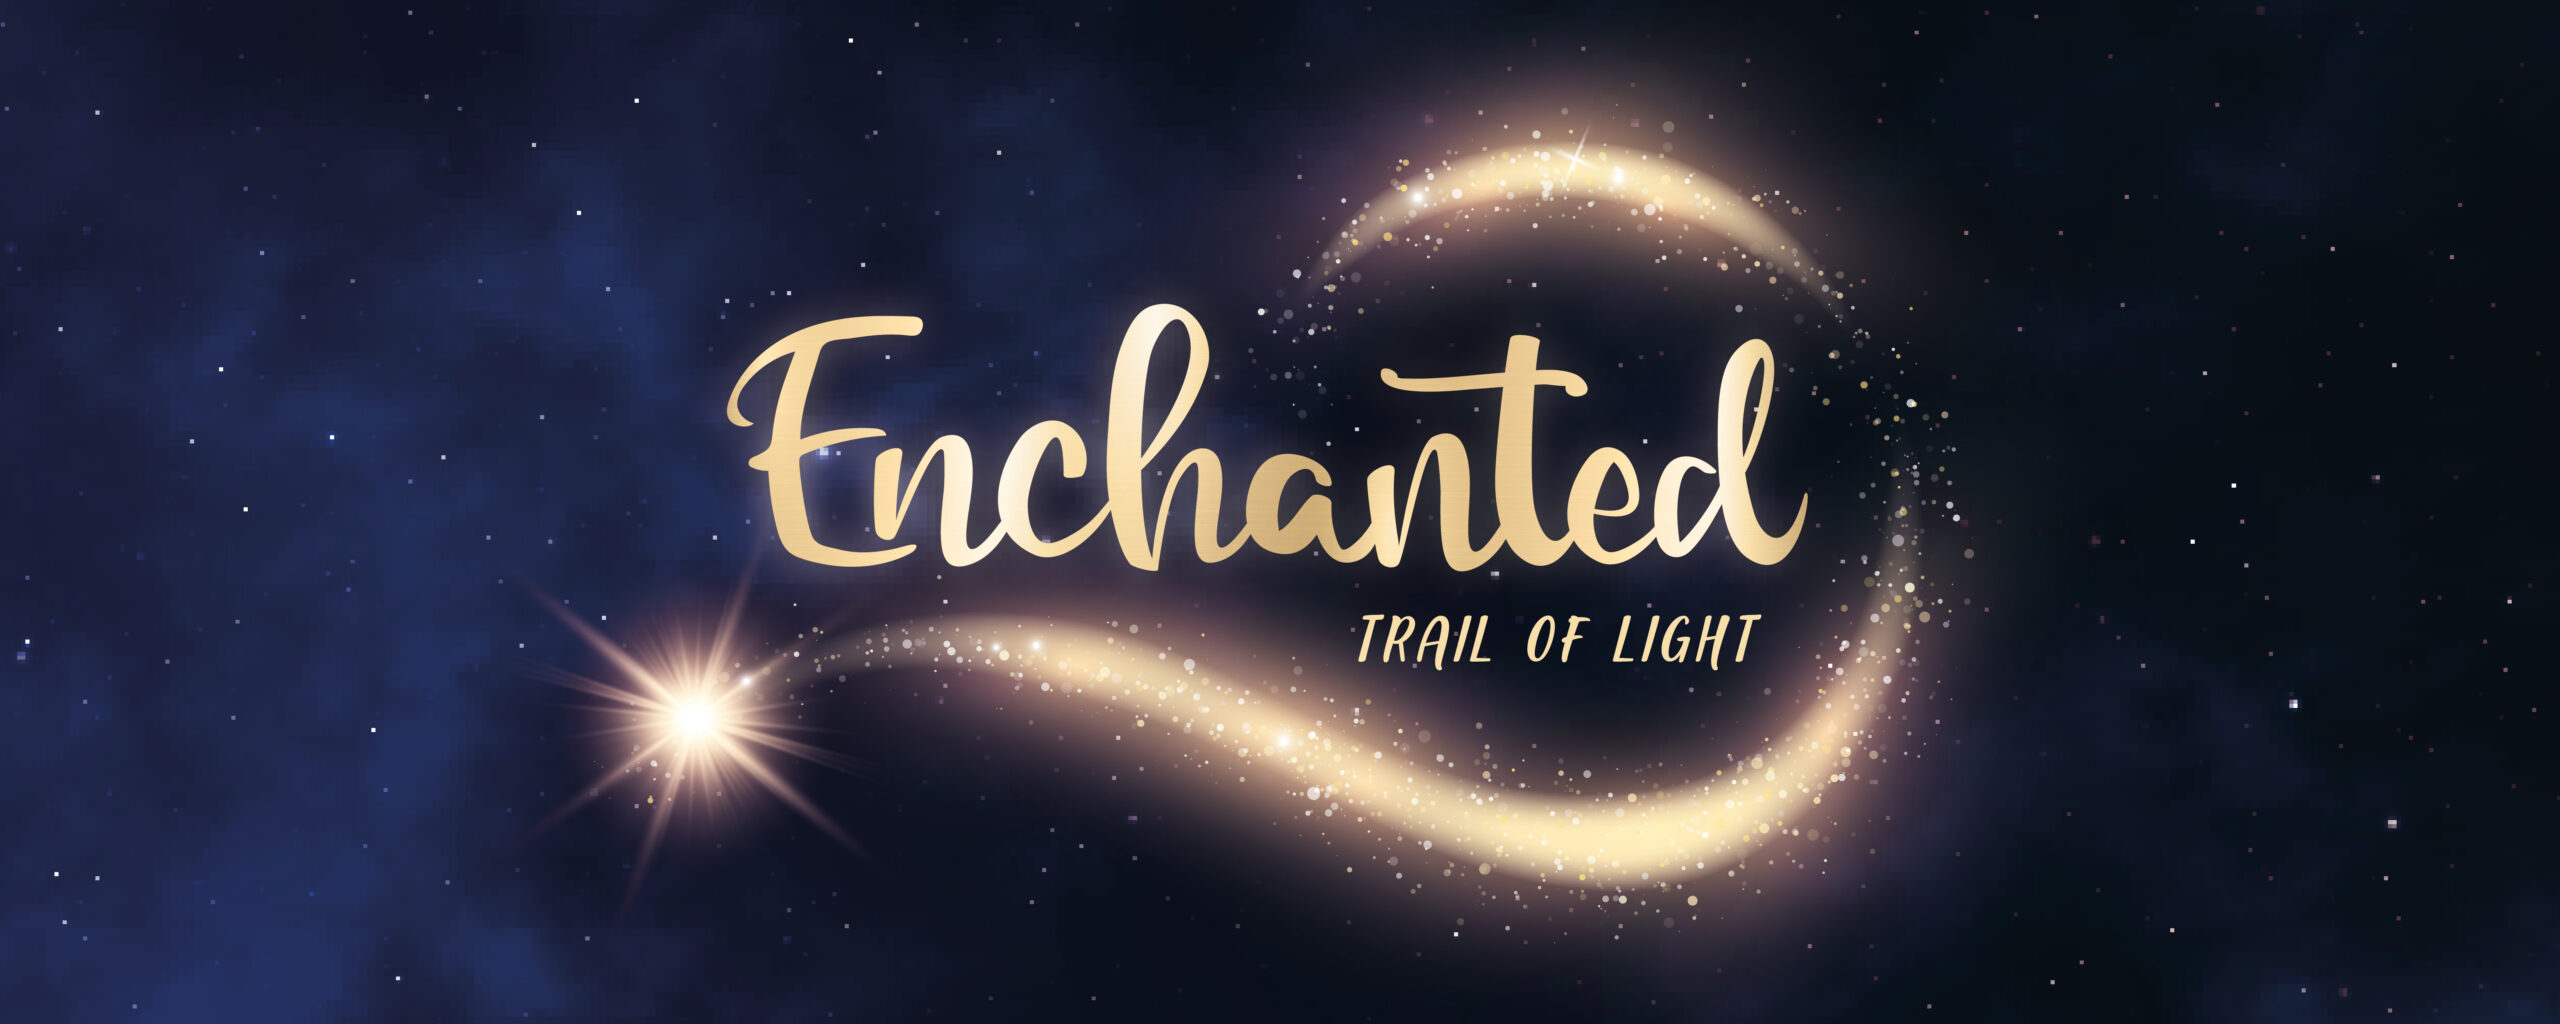 Enchanted Trail of Light – 9th December